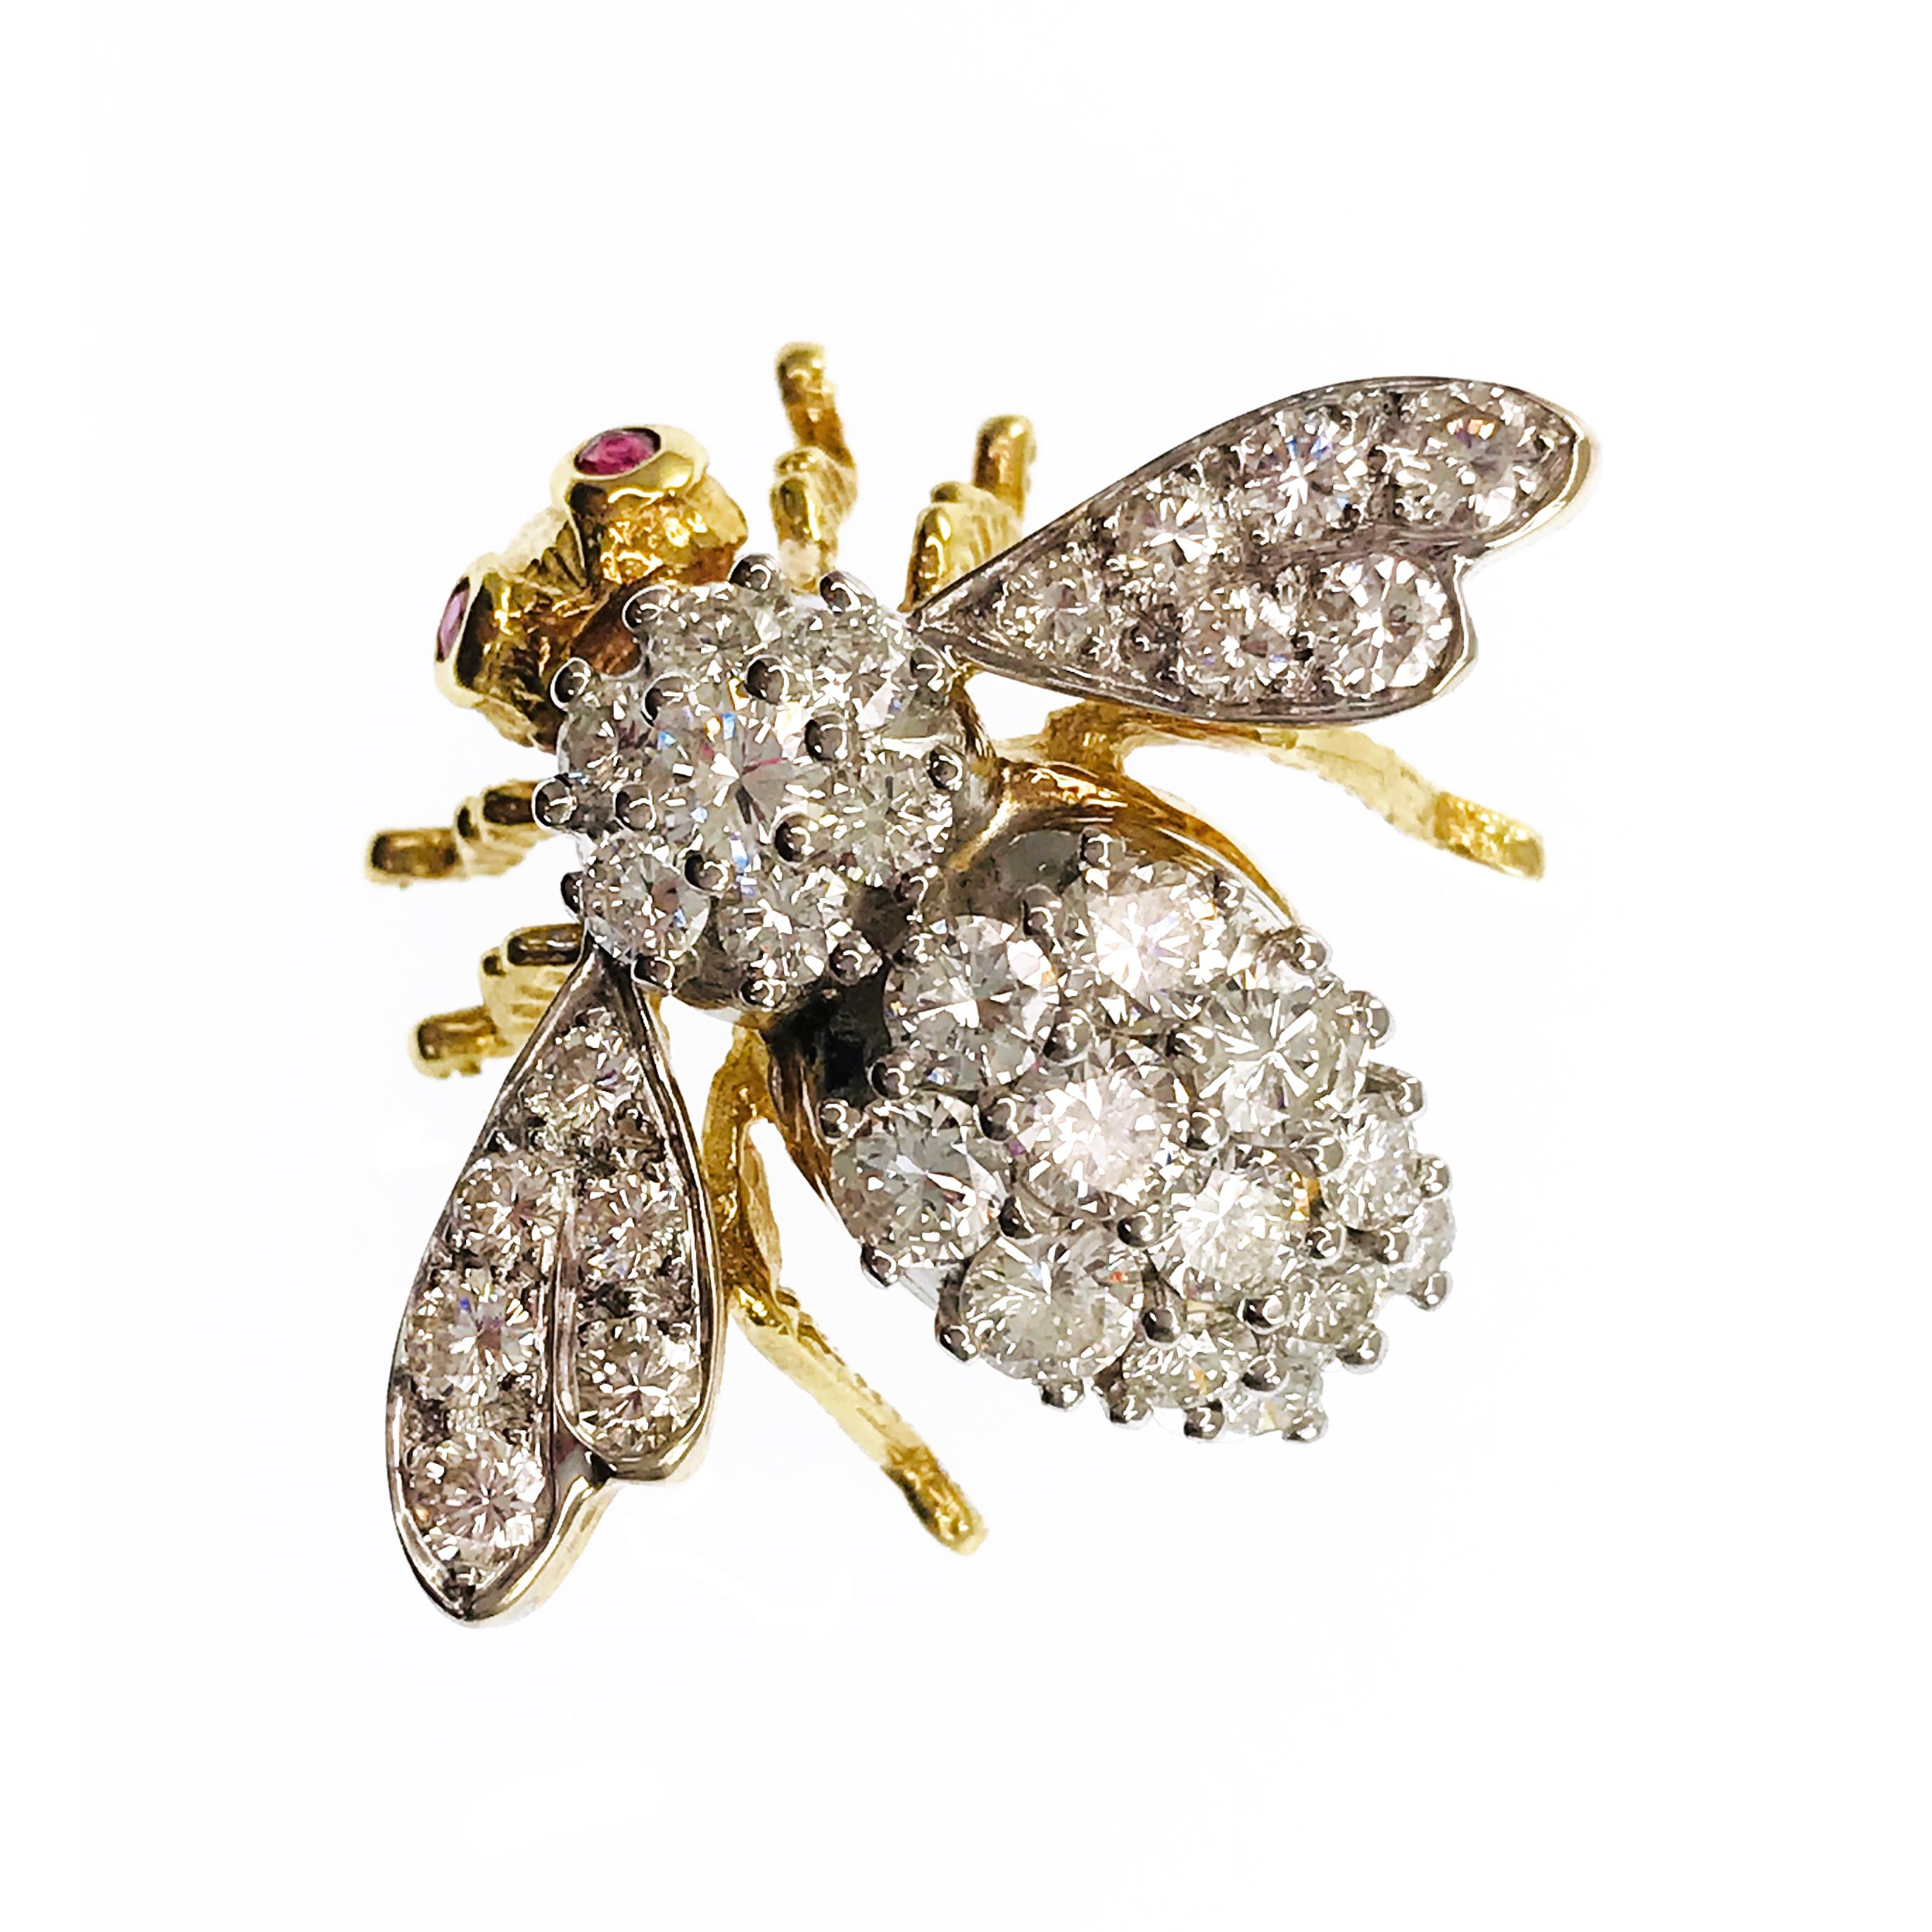 18 Karat Two-Tone Diamond Ruby Bee Brooch Pin. Thirty-one round graduate prong and pavé set diamonds gracefully adorn the body and outspread wings. Diamonds are VS1-VS2 (G.I.A.) in clarity and G-H (G.I.A.) in color with a weight of 3.26ctw. Two